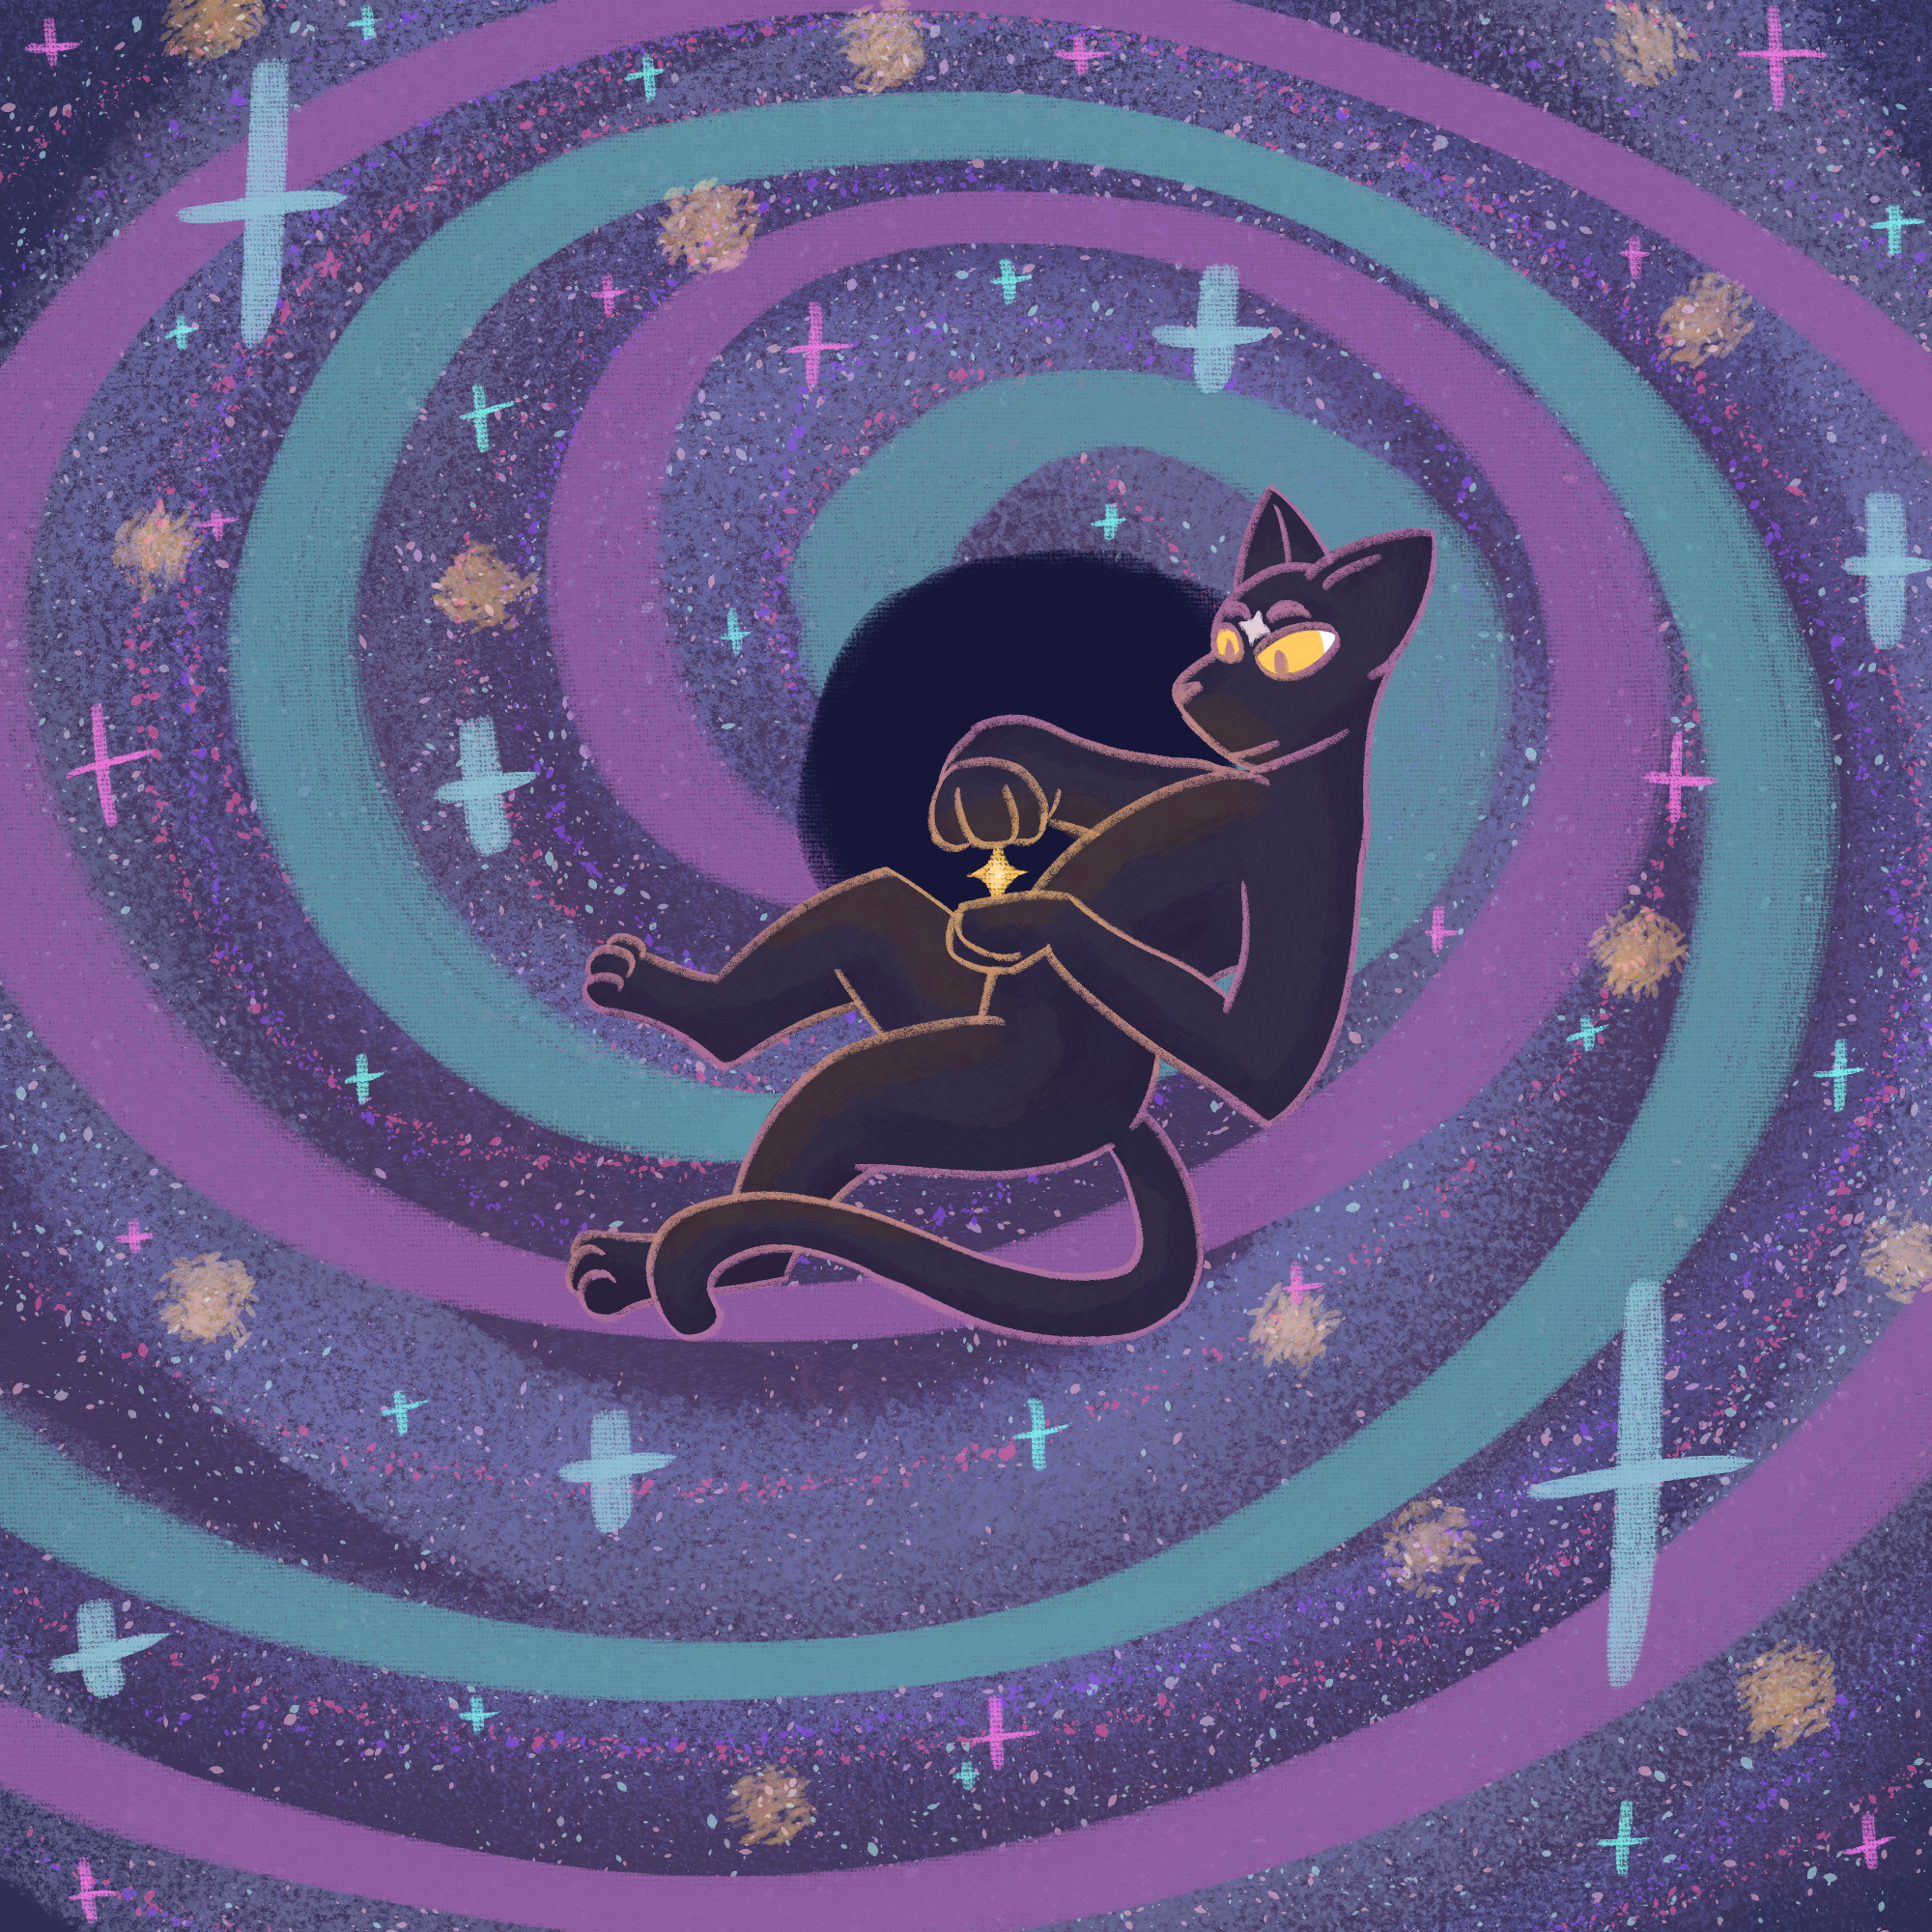 An anthro black cat is floating in space, their hands cupping a small star. Behind them is a blue and pink spiraling galaxy with a black hole at its core.